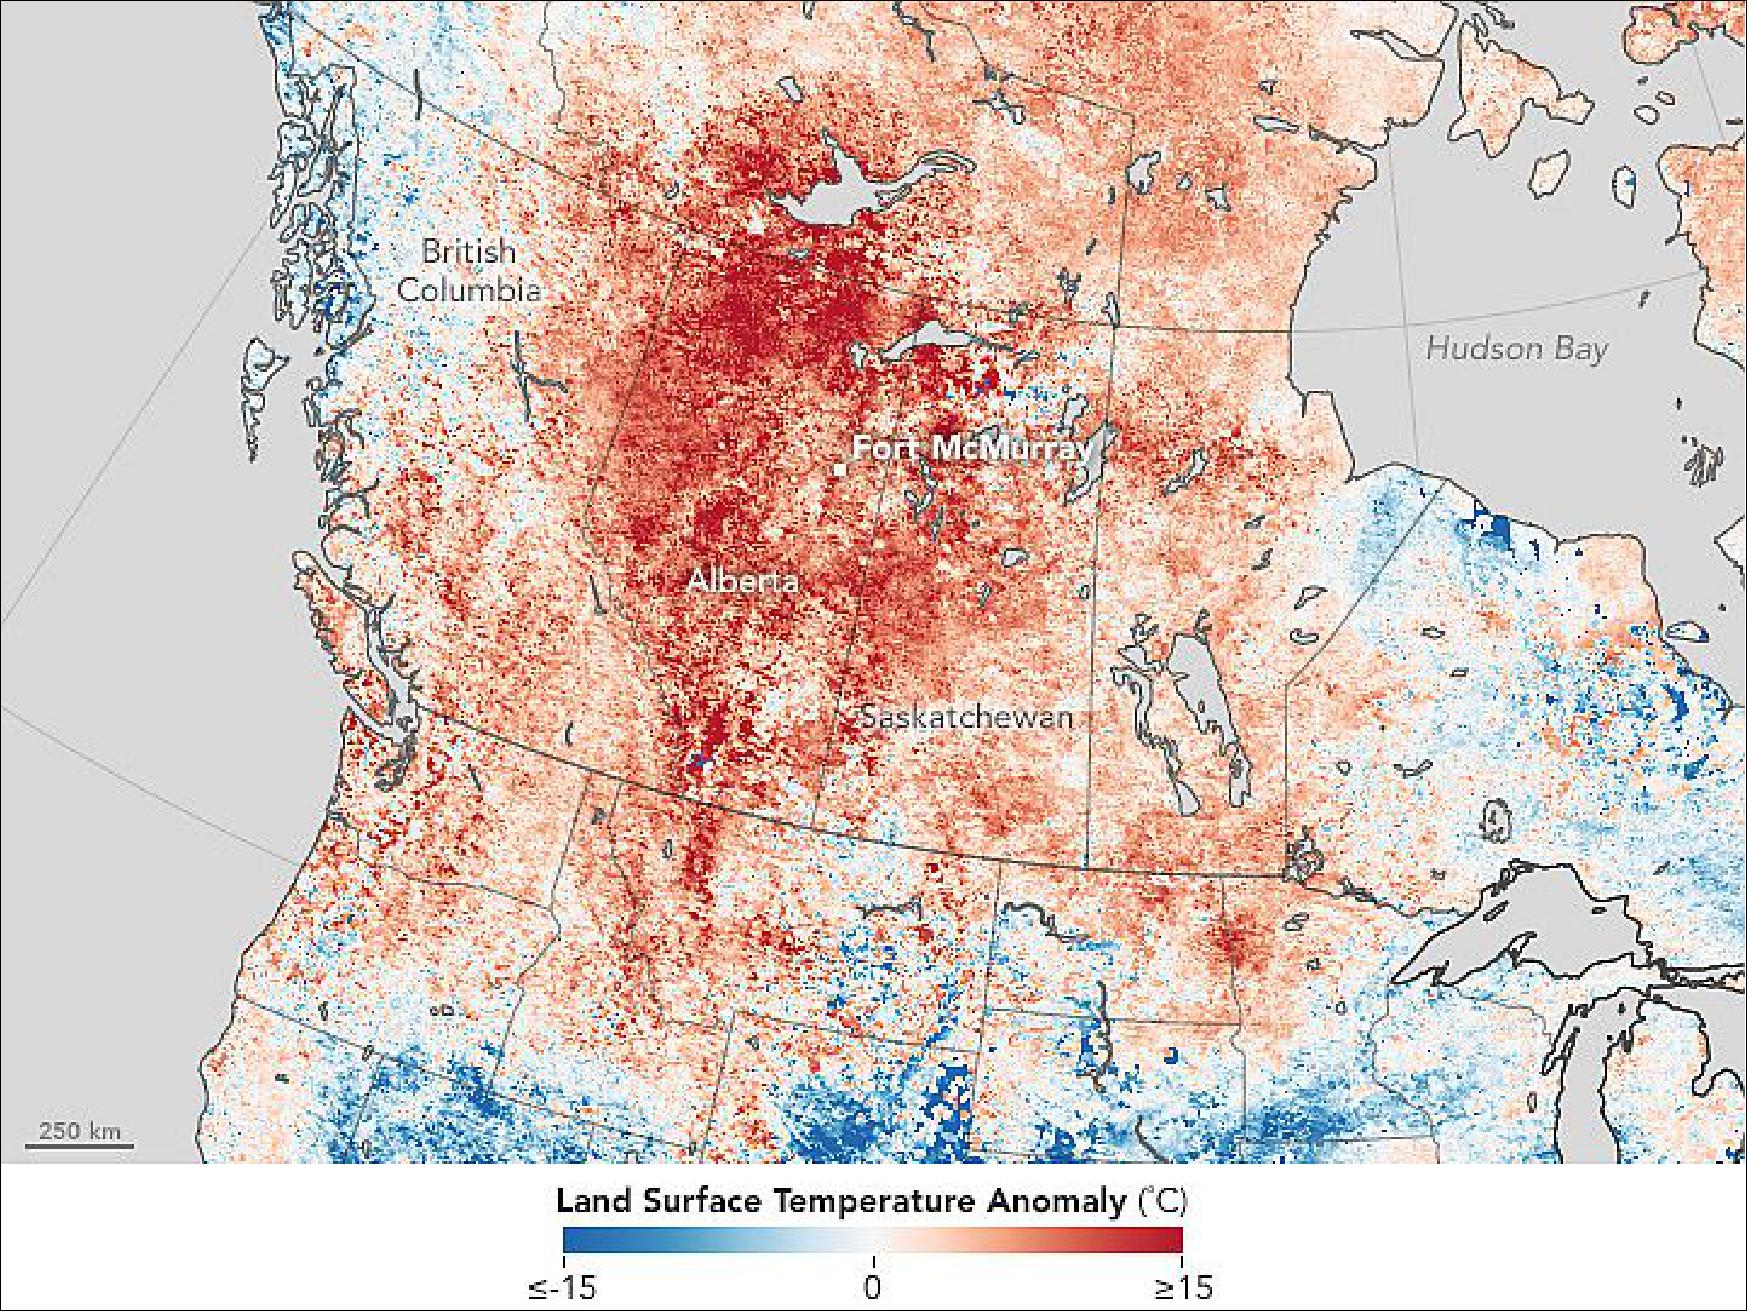 Figure 83: The temperature anomaly map is based on data from the MODIS instrument on the Terra satellite. The map shows the LST (Land Surface Temperature) from April 26 to May 3, 2016, compared to the 2000–2010 average for the same one-week period. Red areas were hotter than the long-term average; blue areas were below average. White pixels had normal temperatures, and gray pixels did not have enough data, most likely due to cloud cover (image credit: NASA Earth Observatory, image by Jesse Allen)